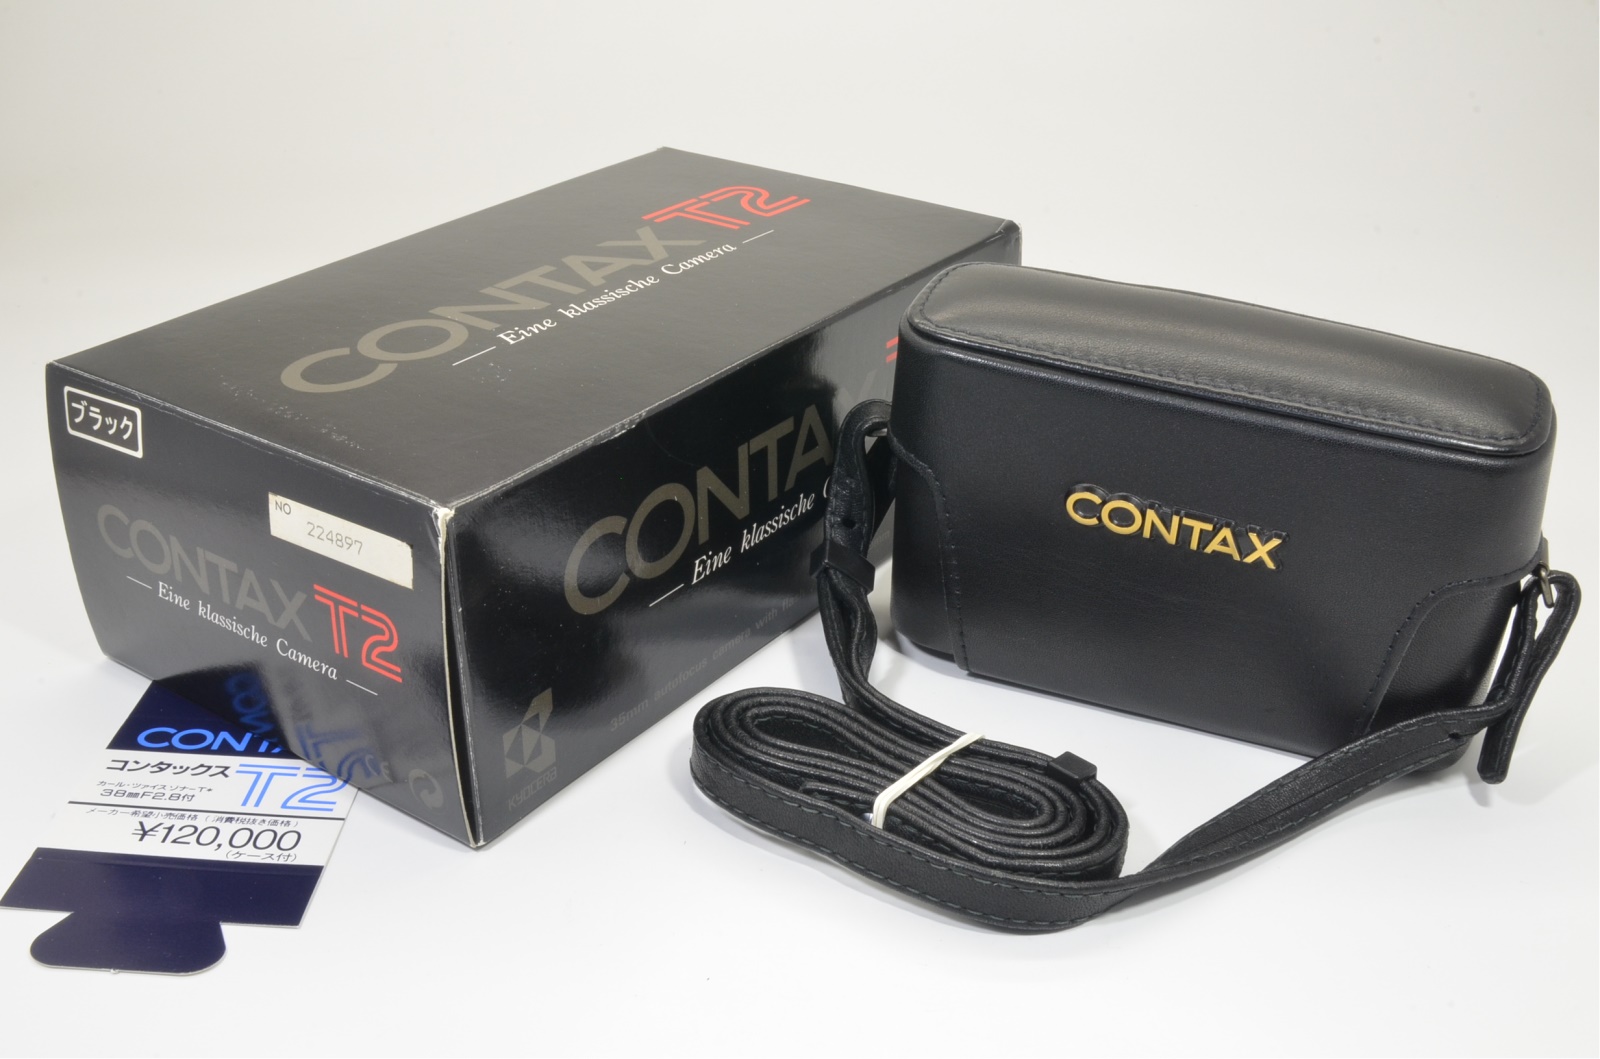 contax t2 black limited p&s 35mm film camera near mint shooting tested